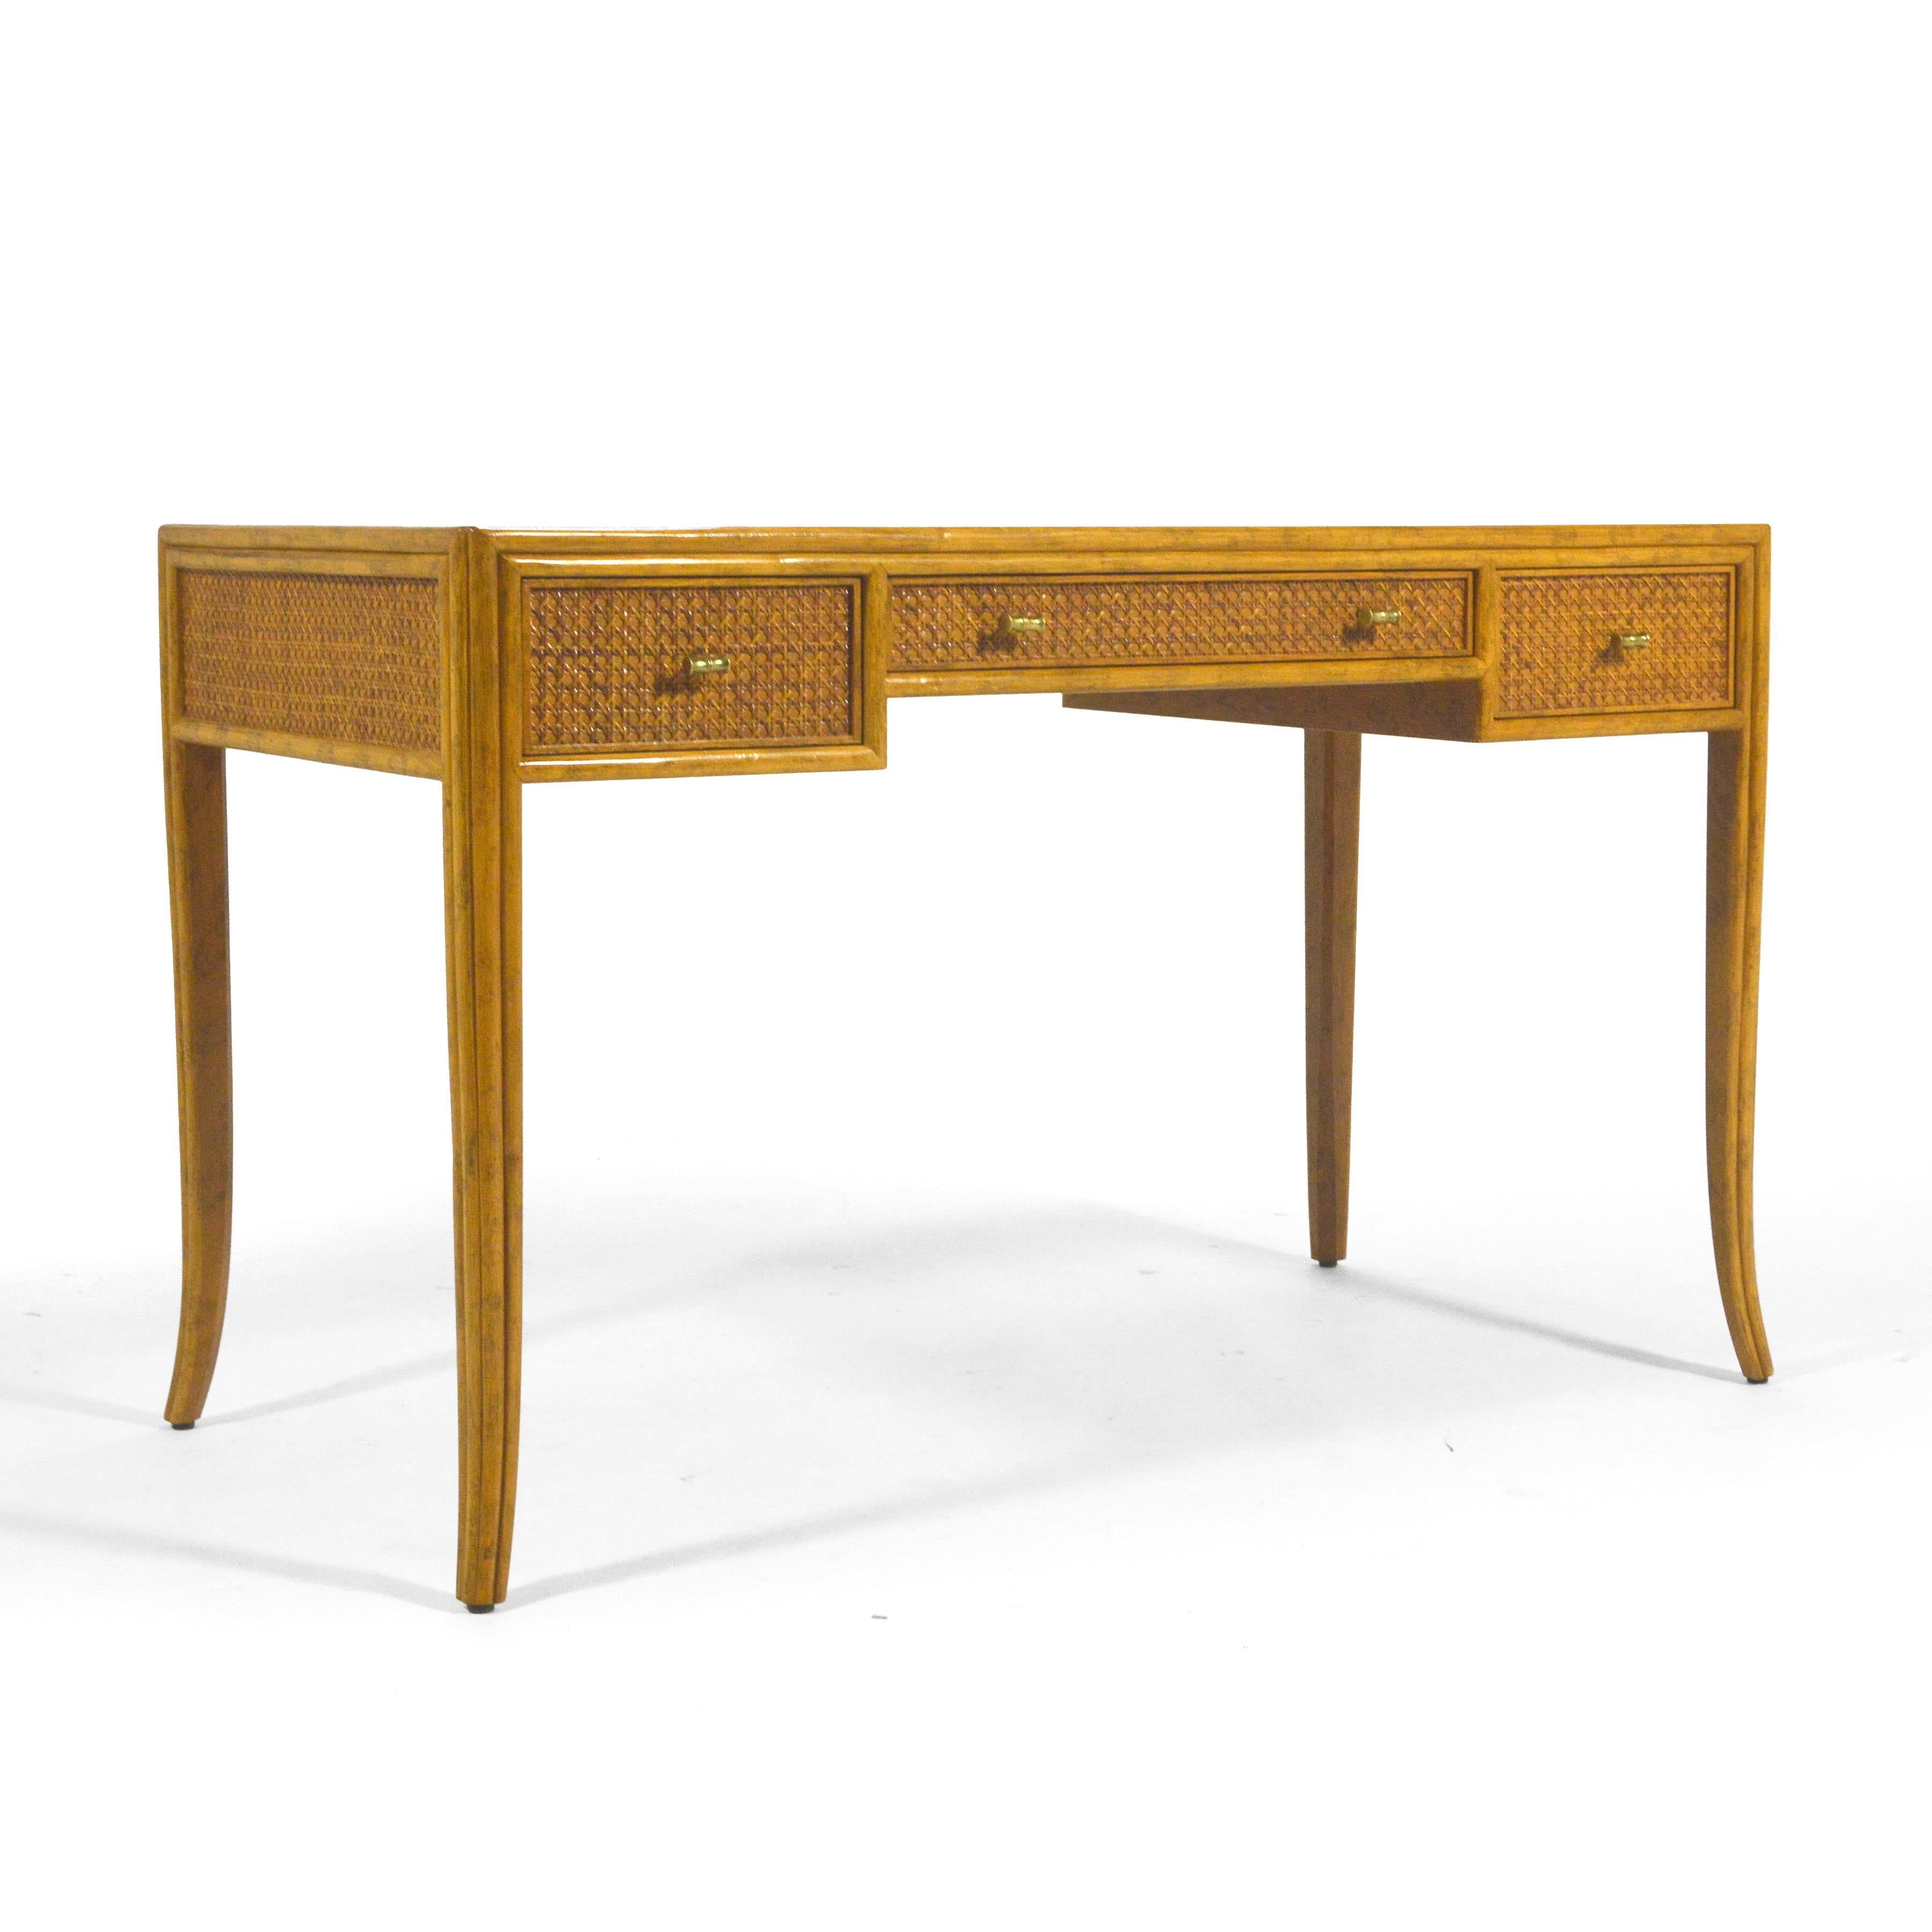 This exquisite design by Elinor McGuire for McGuire of San Fransisco is an exercise in subtle beauty and refined detailing. With a body covered in cane, an oak top, slightly splayed legs, and solid brass bamboo-form pulls, the desk is expertly